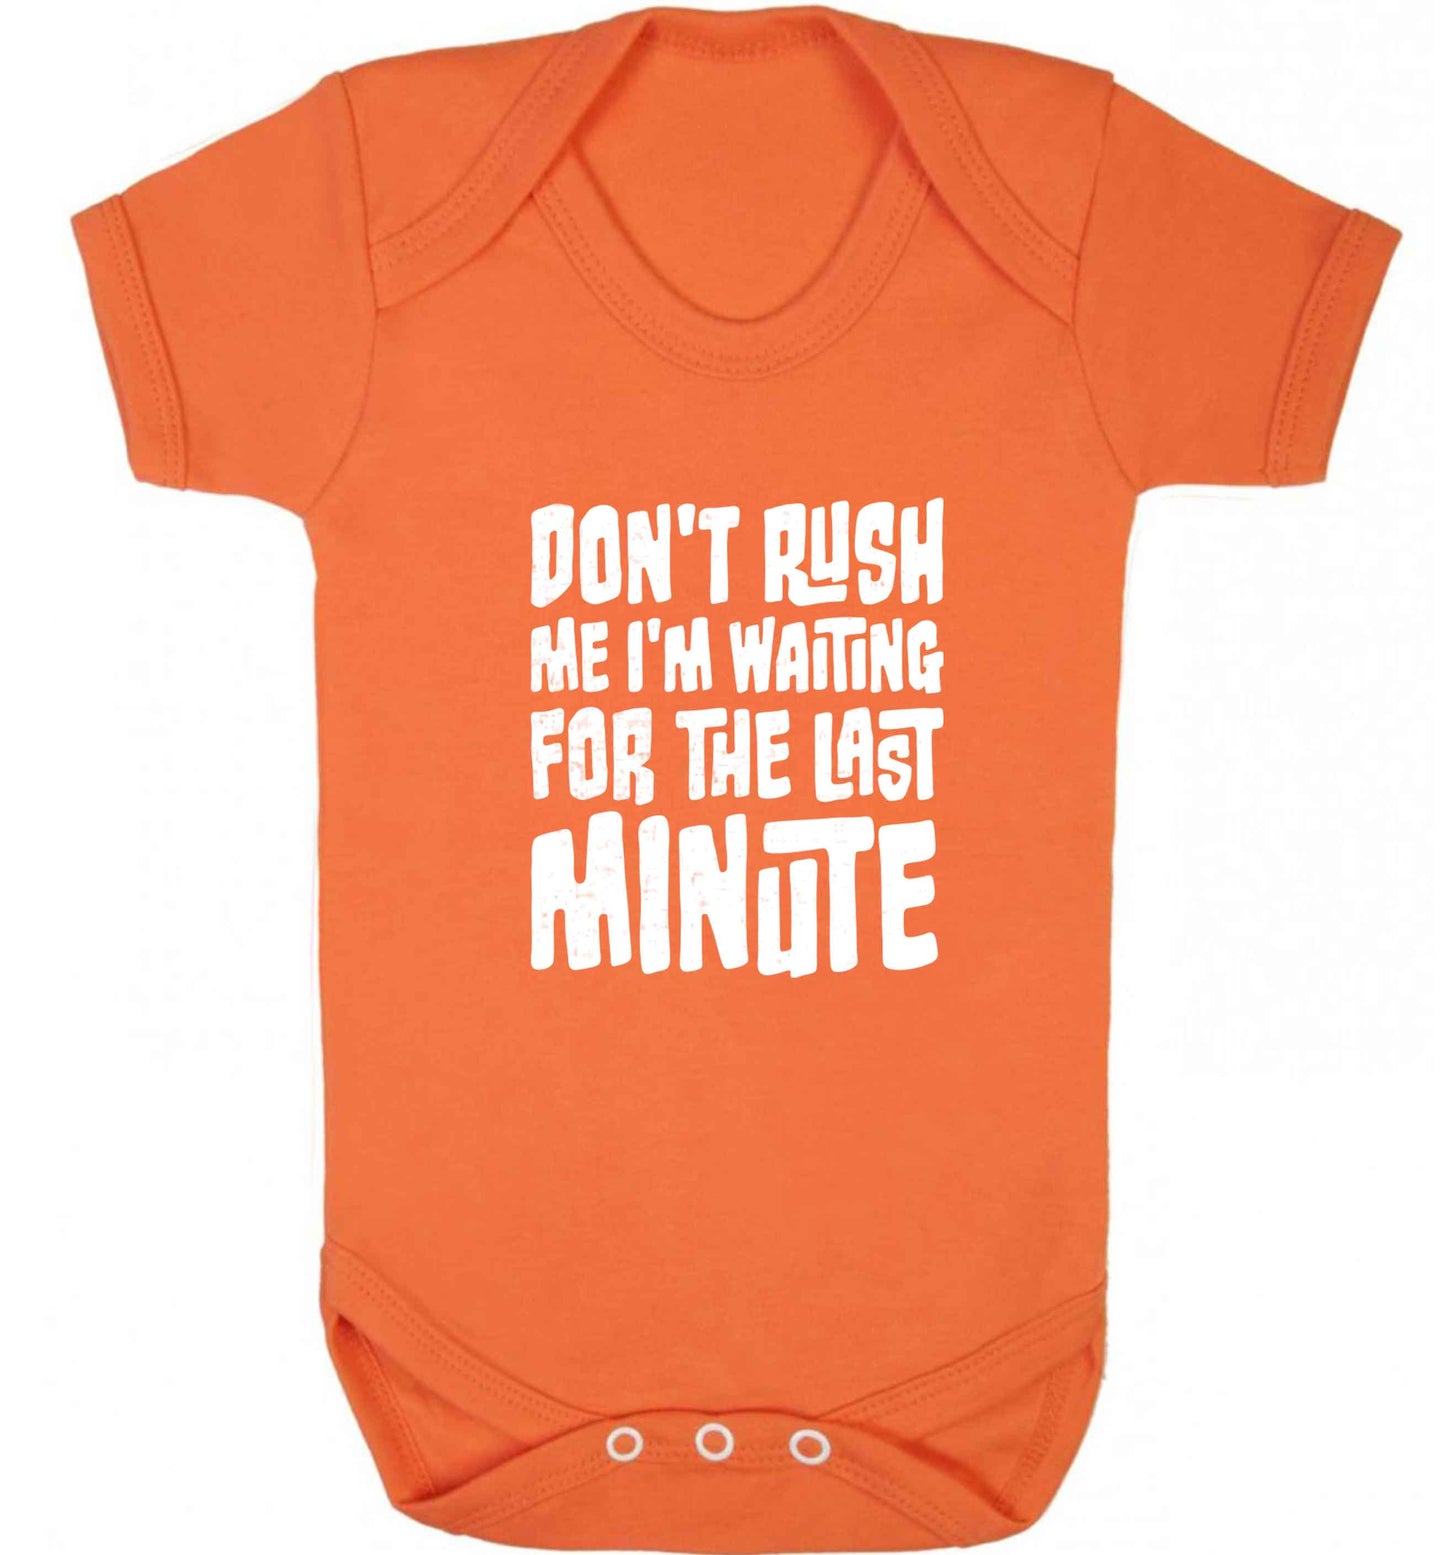 Don't rush me I'm waiting for the last minute baby vest orange 18-24 months